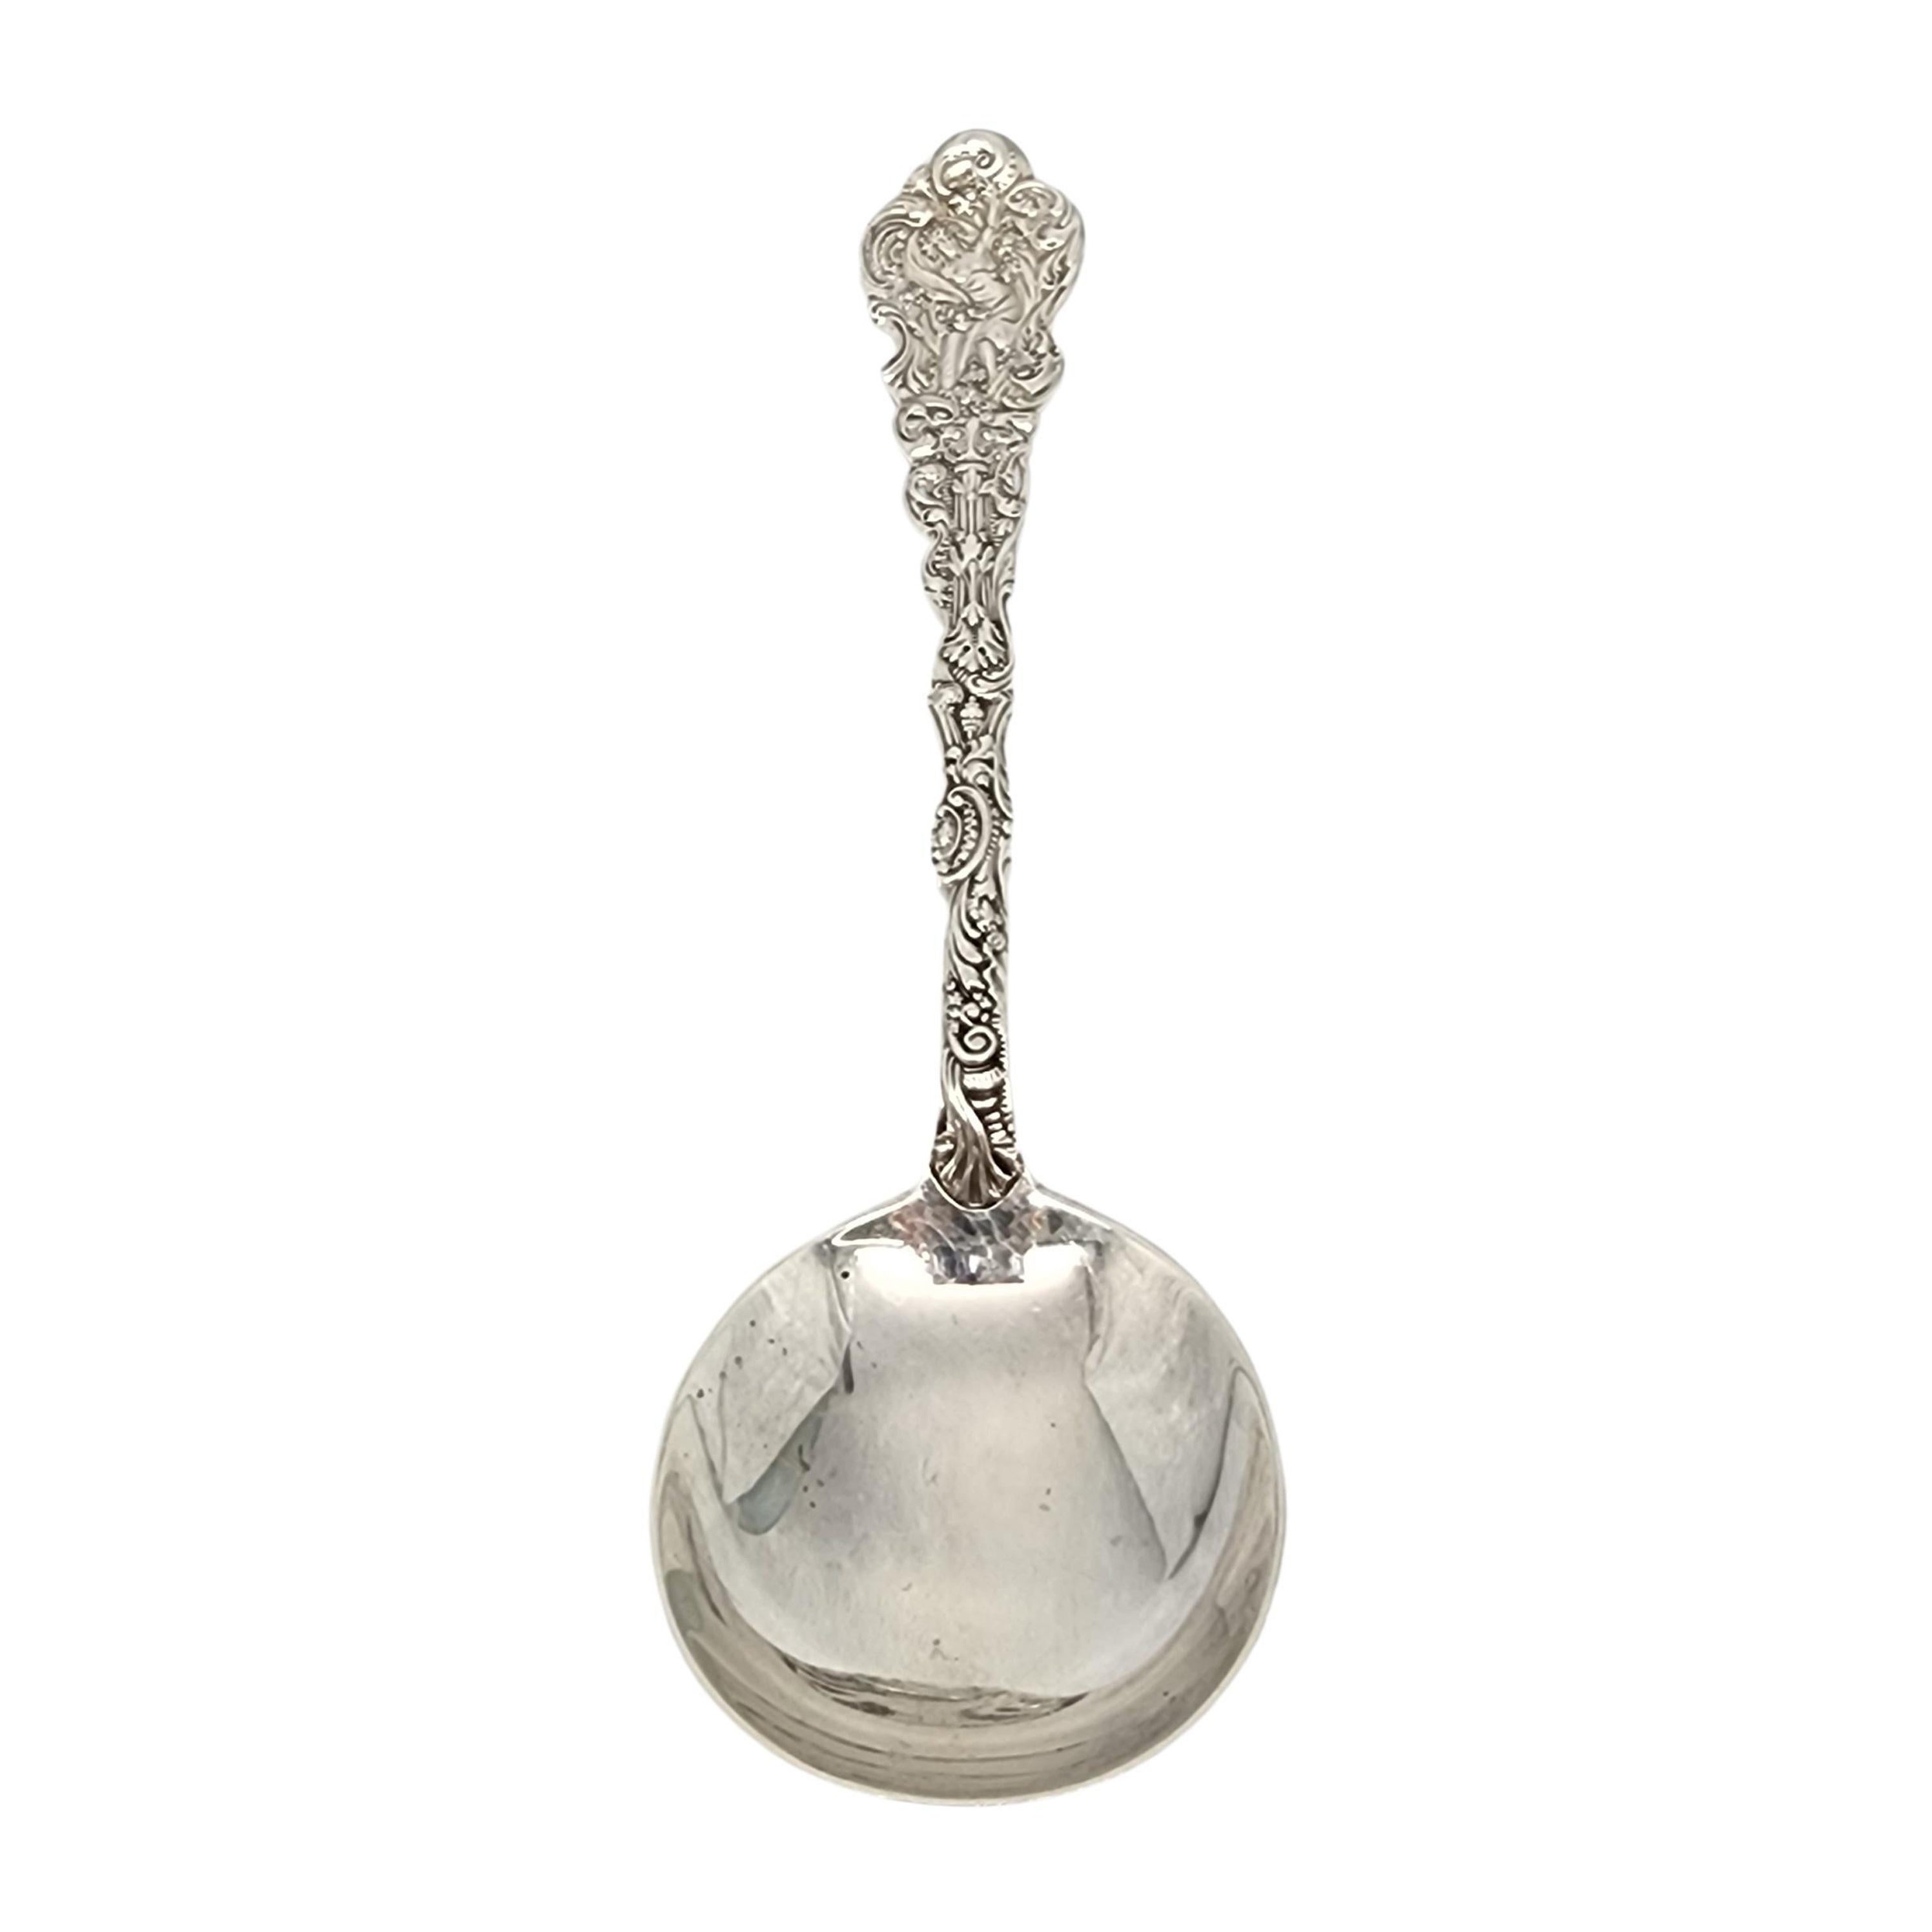 Gorham Versailles Sterling Silver Round Bowl Gumbo Spoon 6 5/8" #17139 For Sale